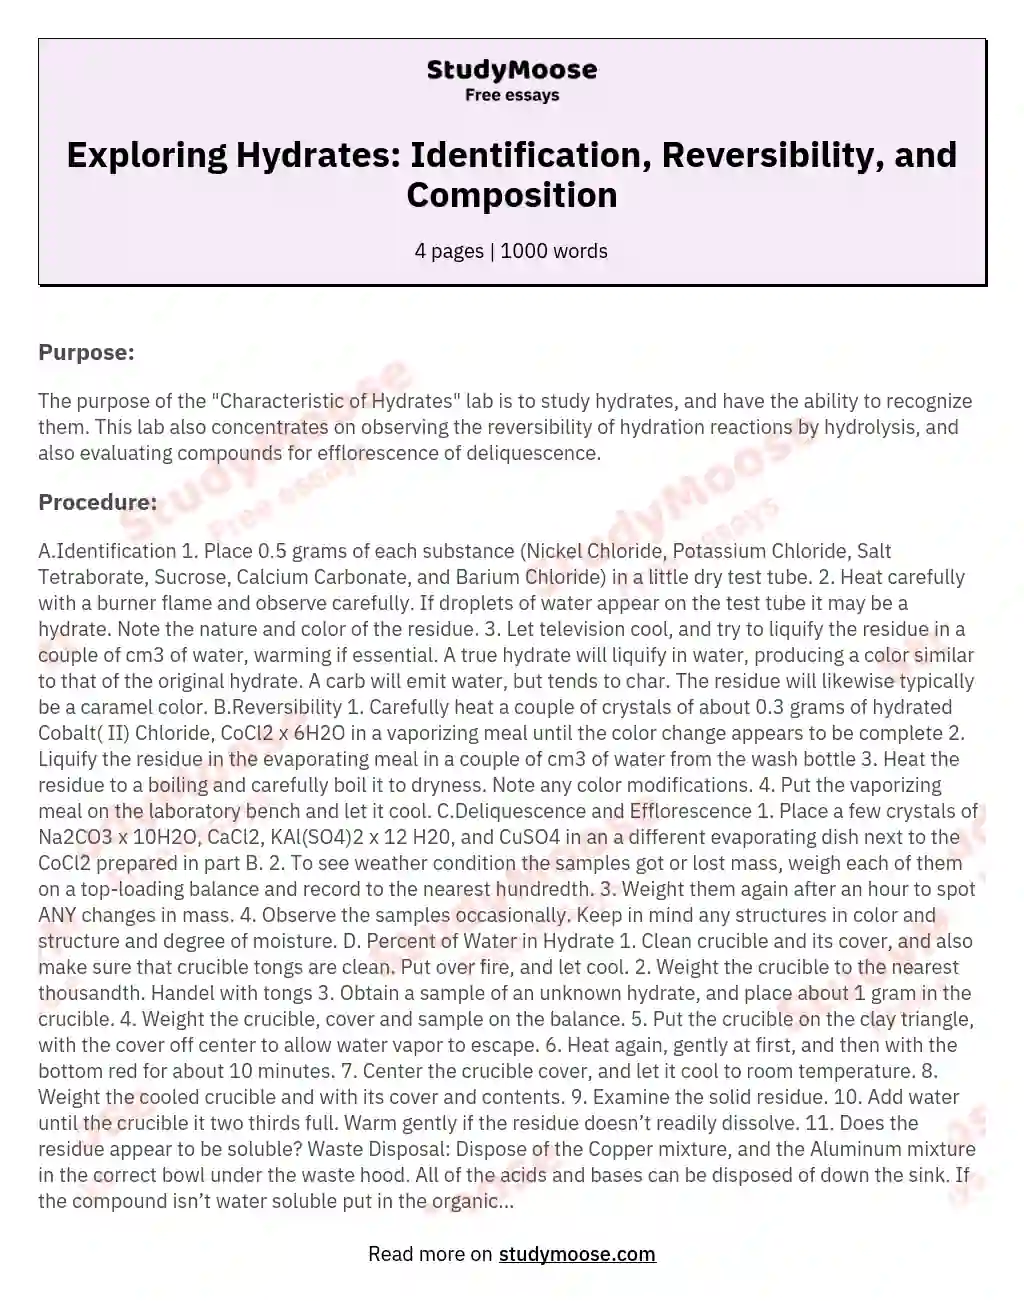 Exploring Hydrates: Identification, Reversibility, and Composition essay